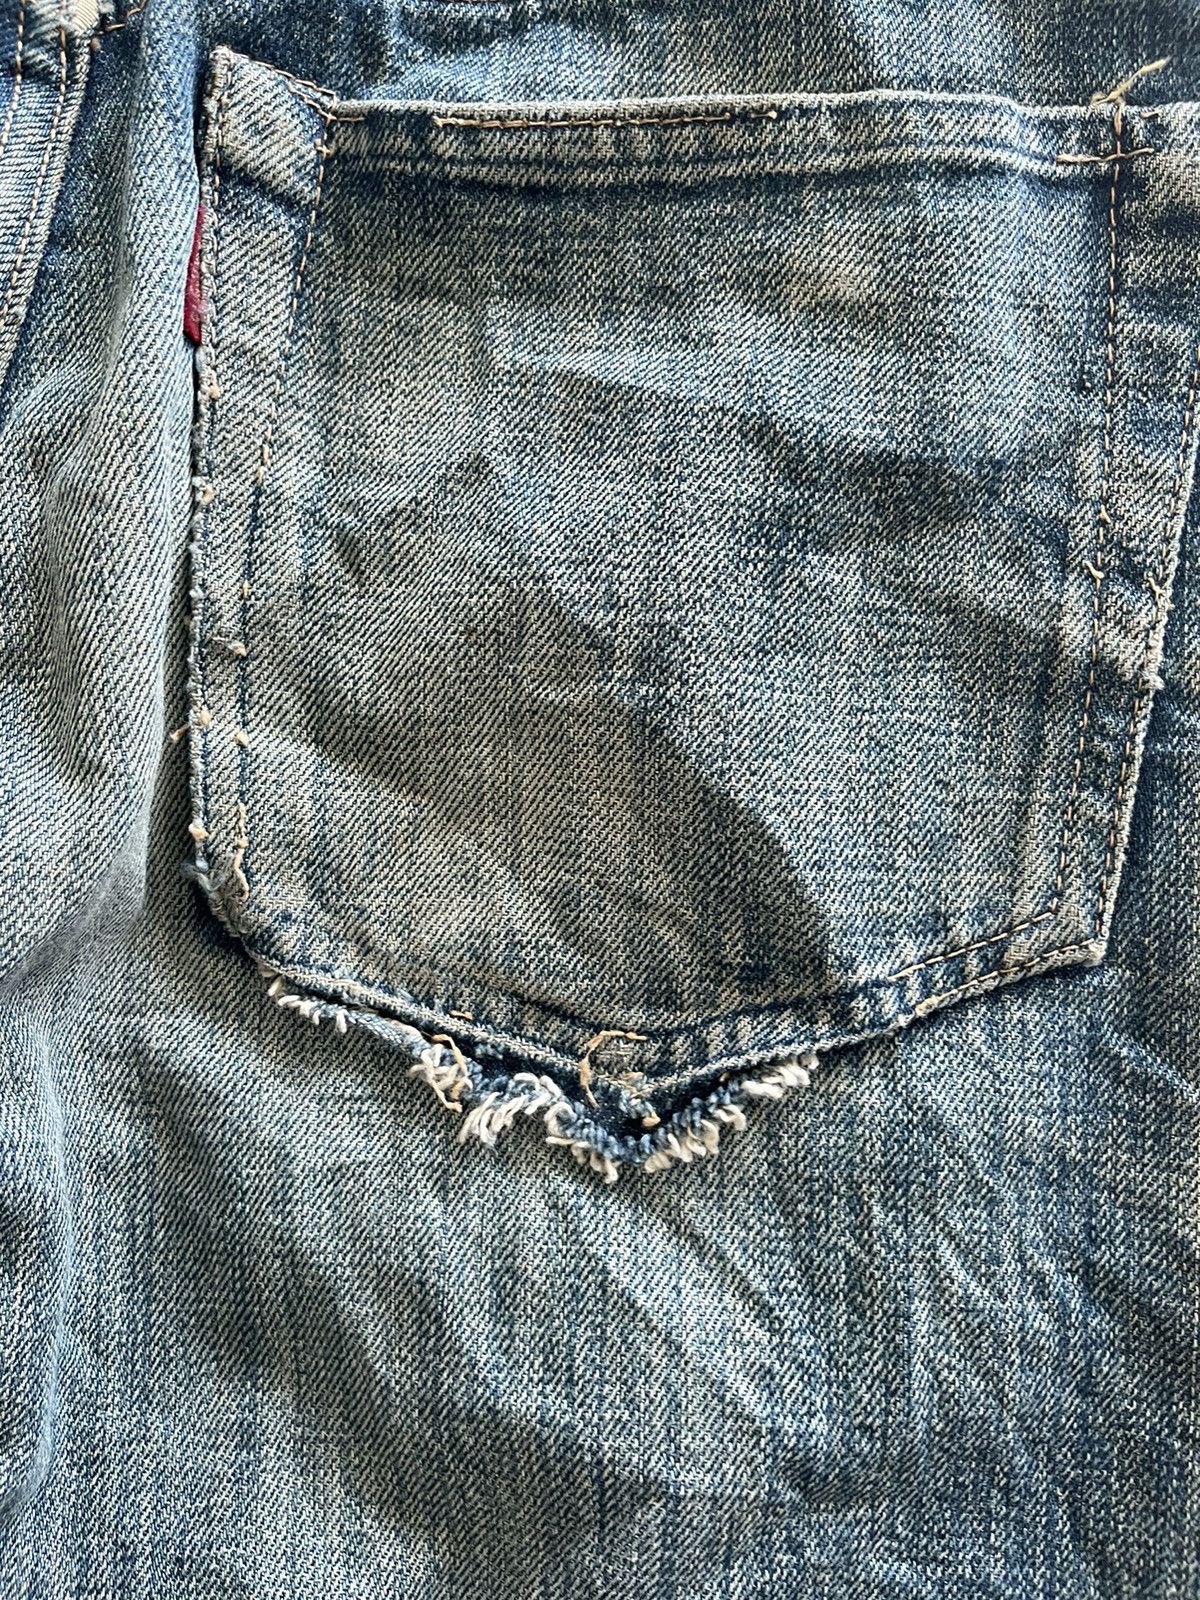 Japanese Brand - JAPANESE REPRO DENIM JEANS, BARNS OUTFITTERS & CO BRAND - 11